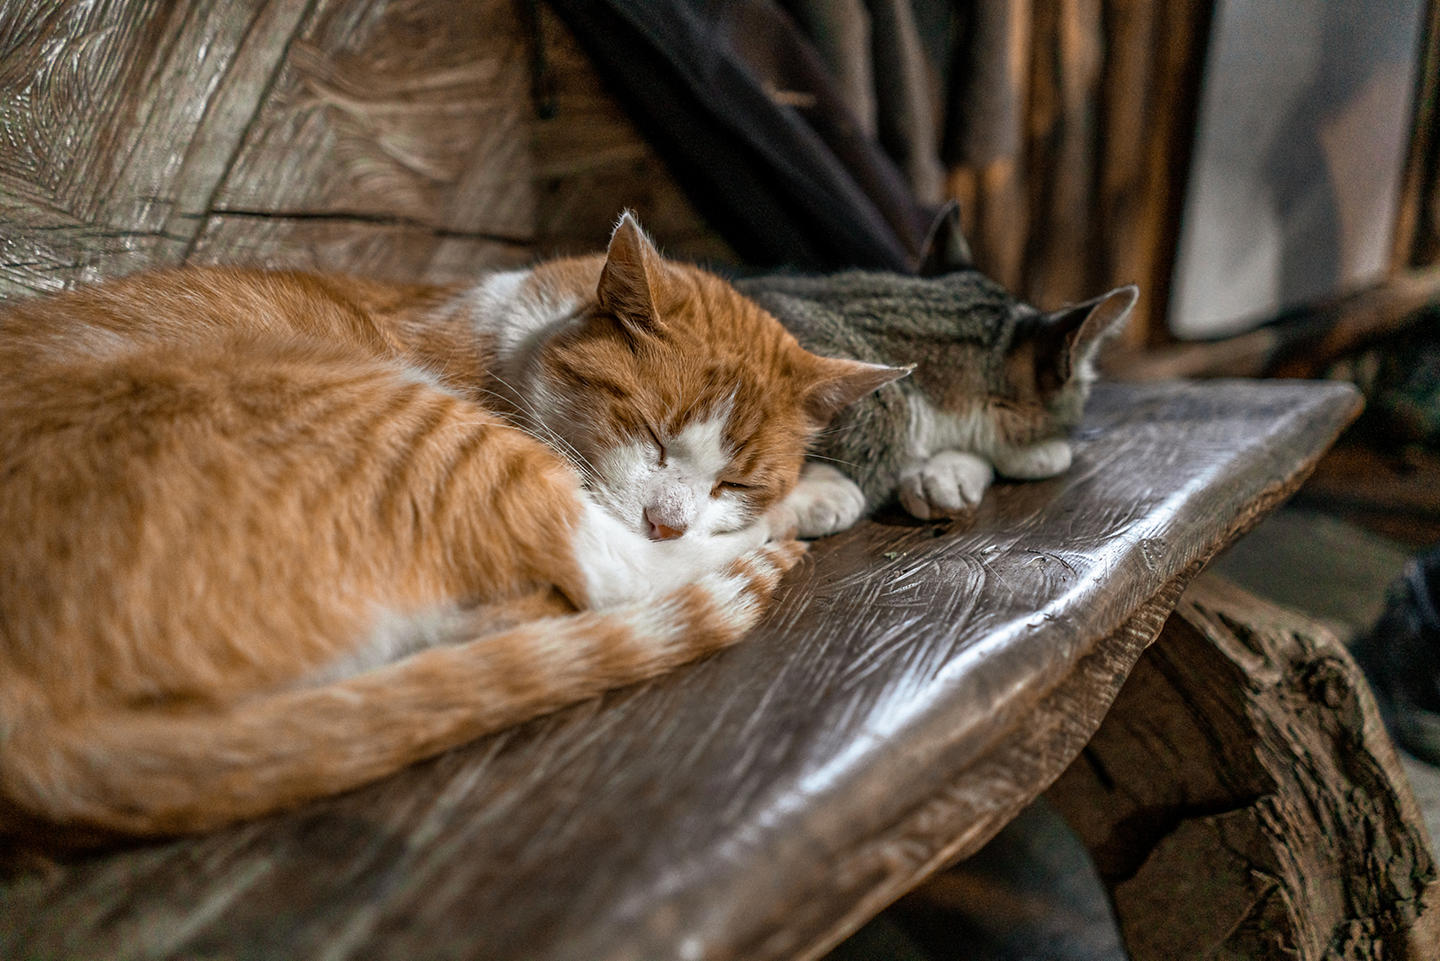 Two cats sleeping on bench.